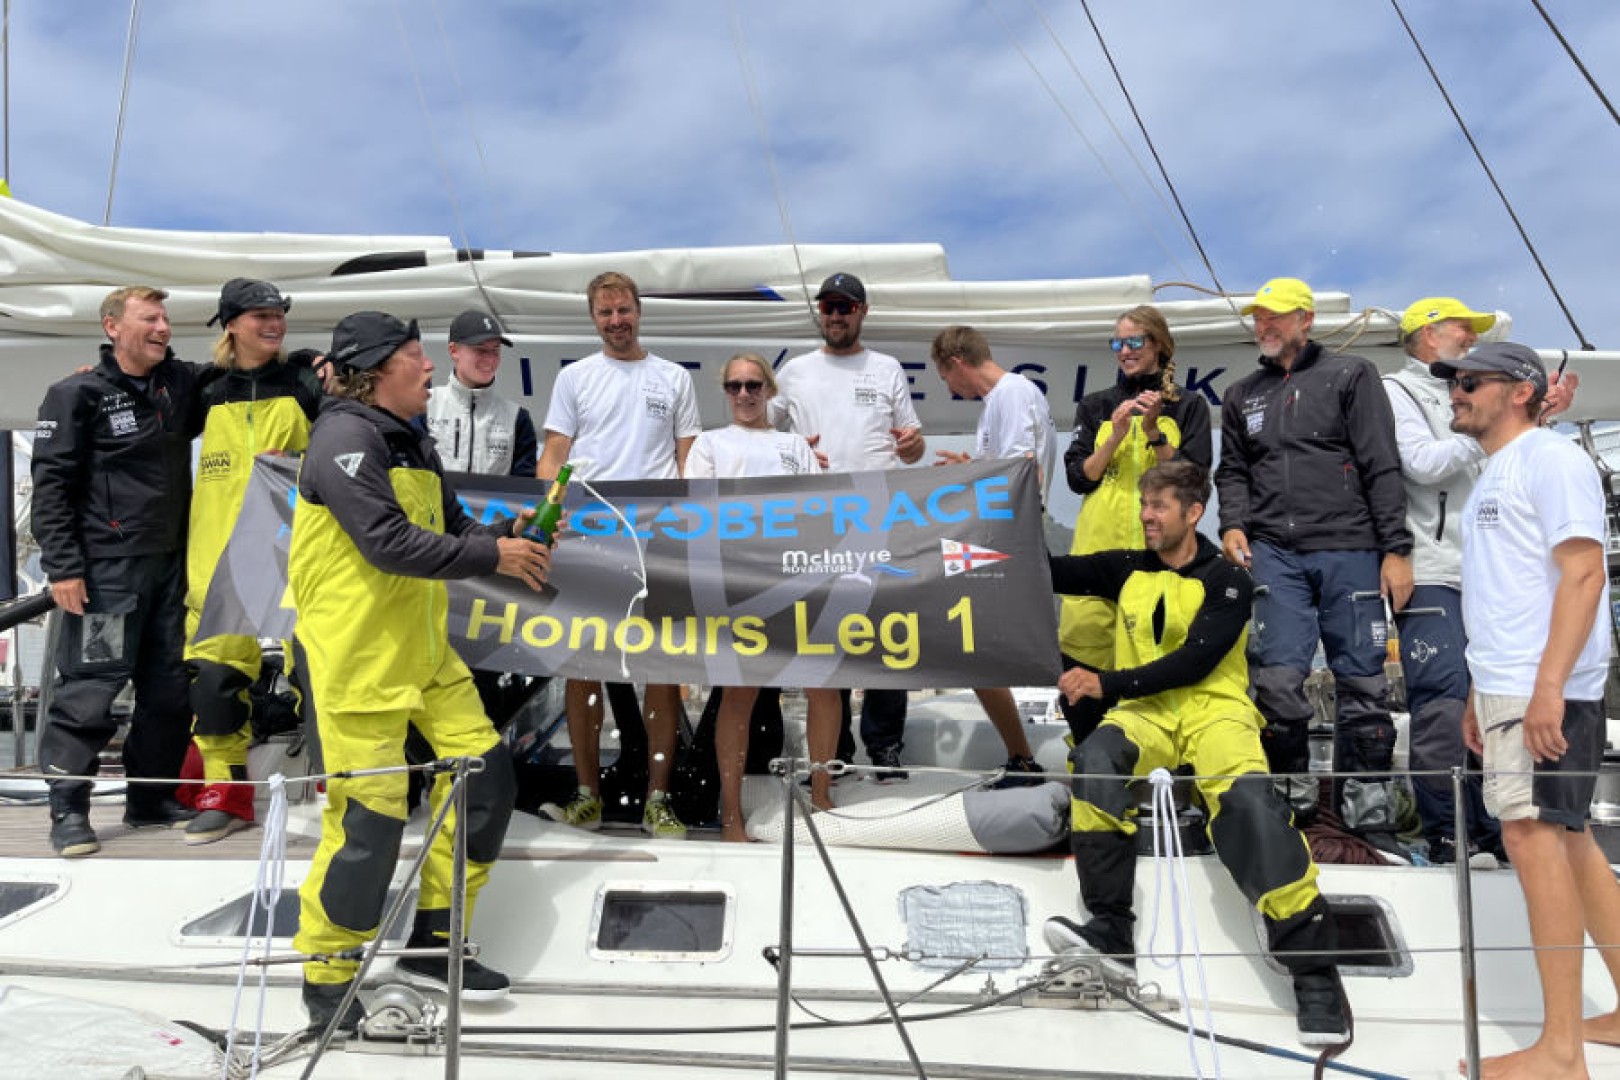 Champagne time for Spirit of Helsinki to celebrate line honours victory in Cape Town. Credit: Jacqueline Kavanagh / OGR 2023.